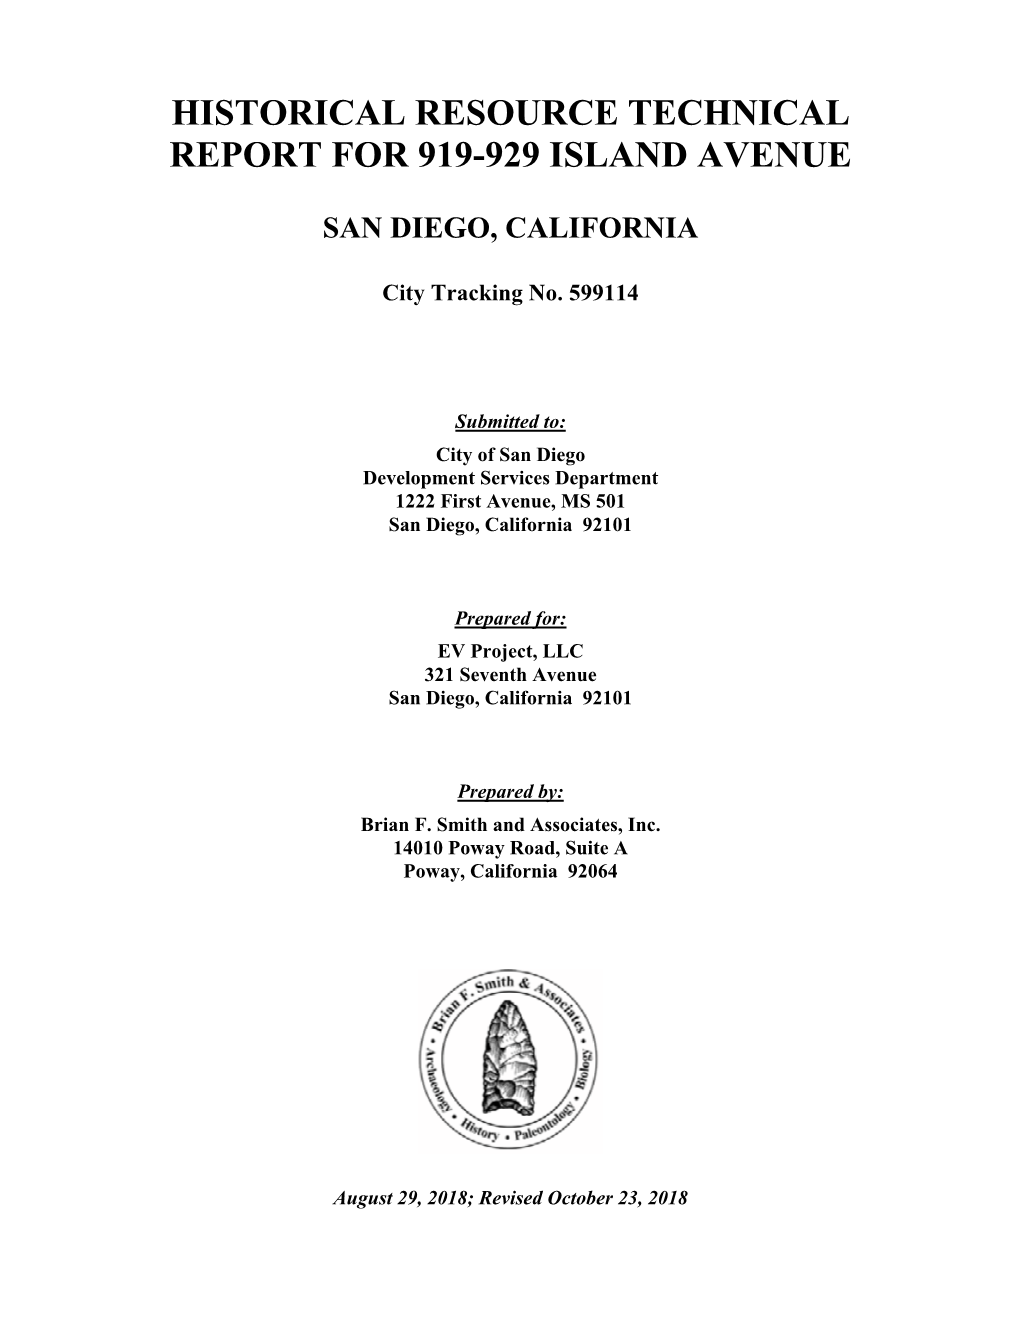 Historical Resource Technical Report for 919-929 Island Avenue San Diego